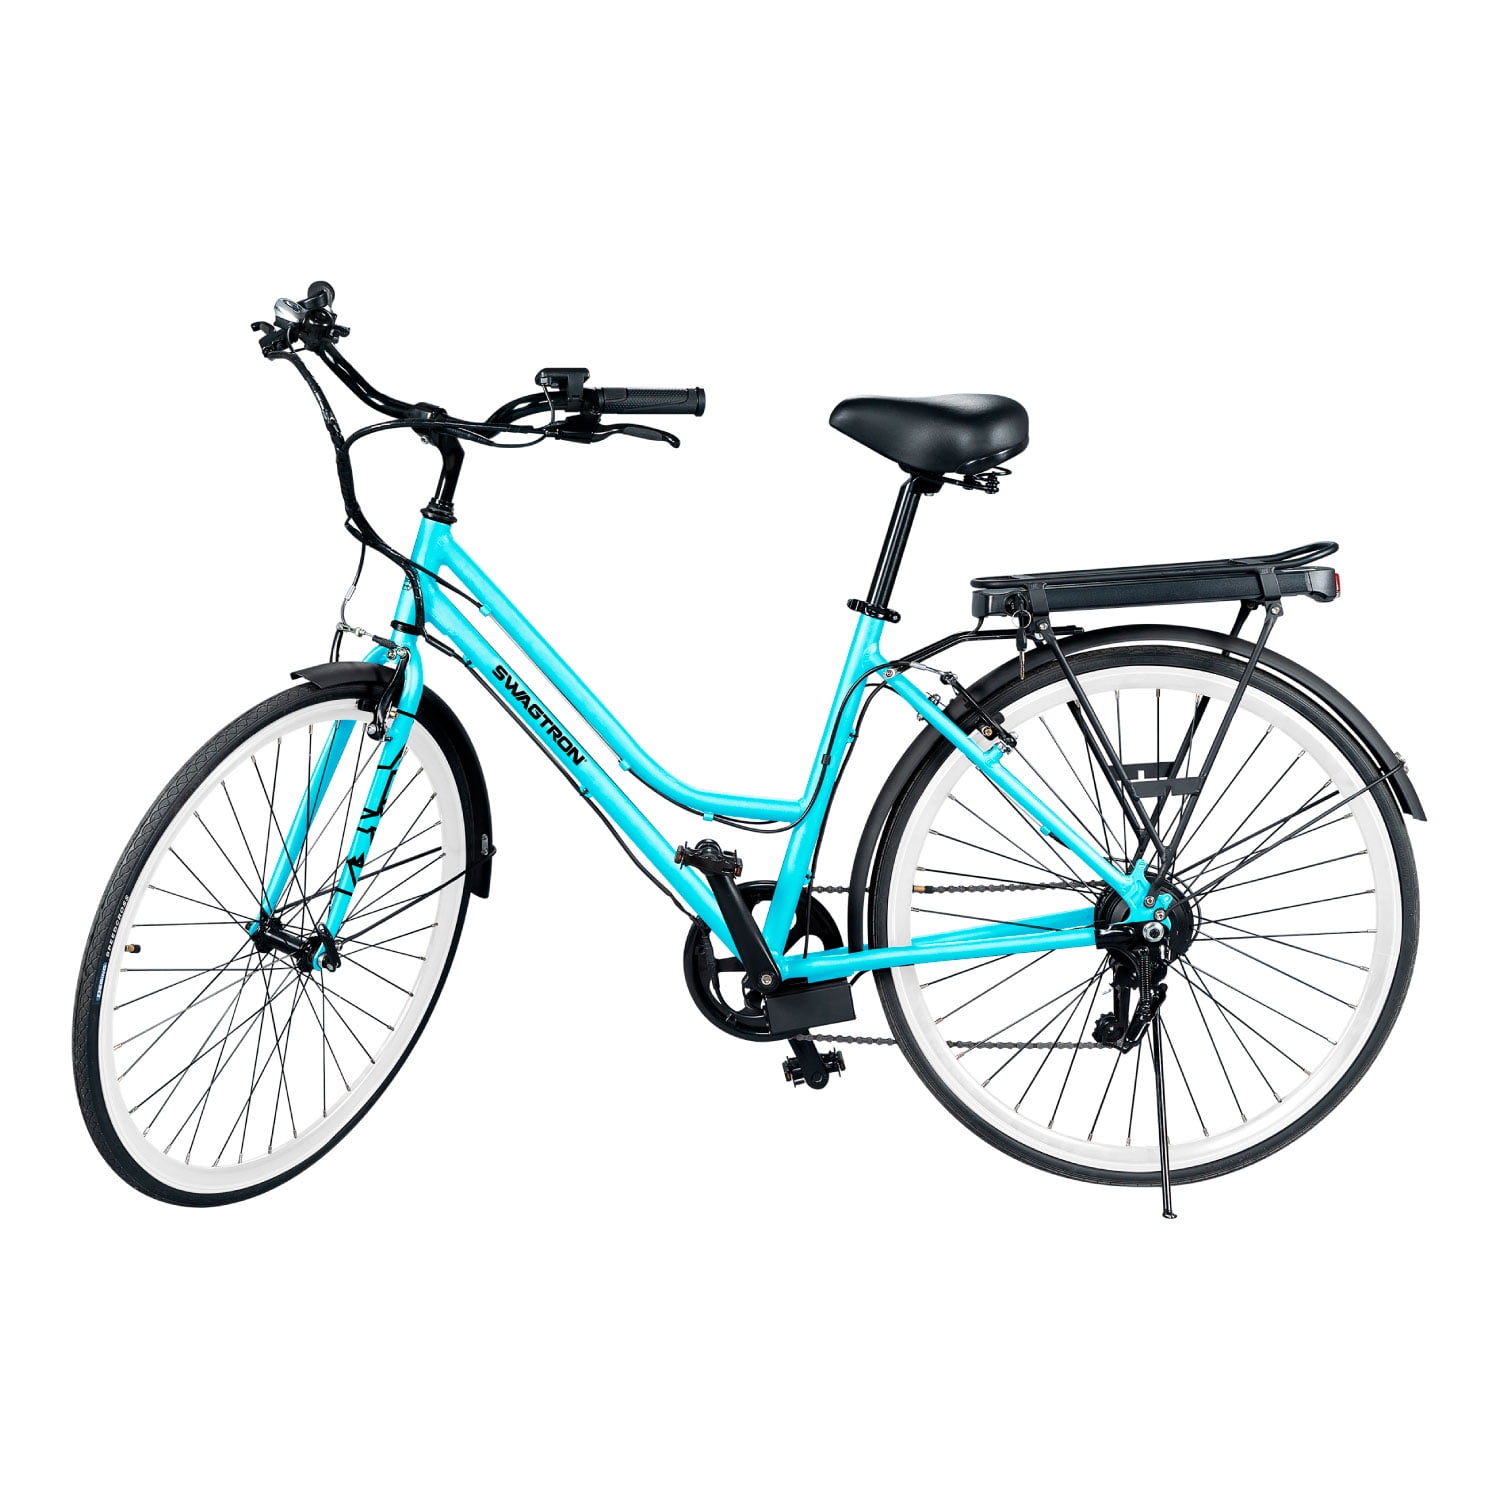 Buy Swagtron EB9 Electric Bike City with Shimano 7 Speed Cruiser Style